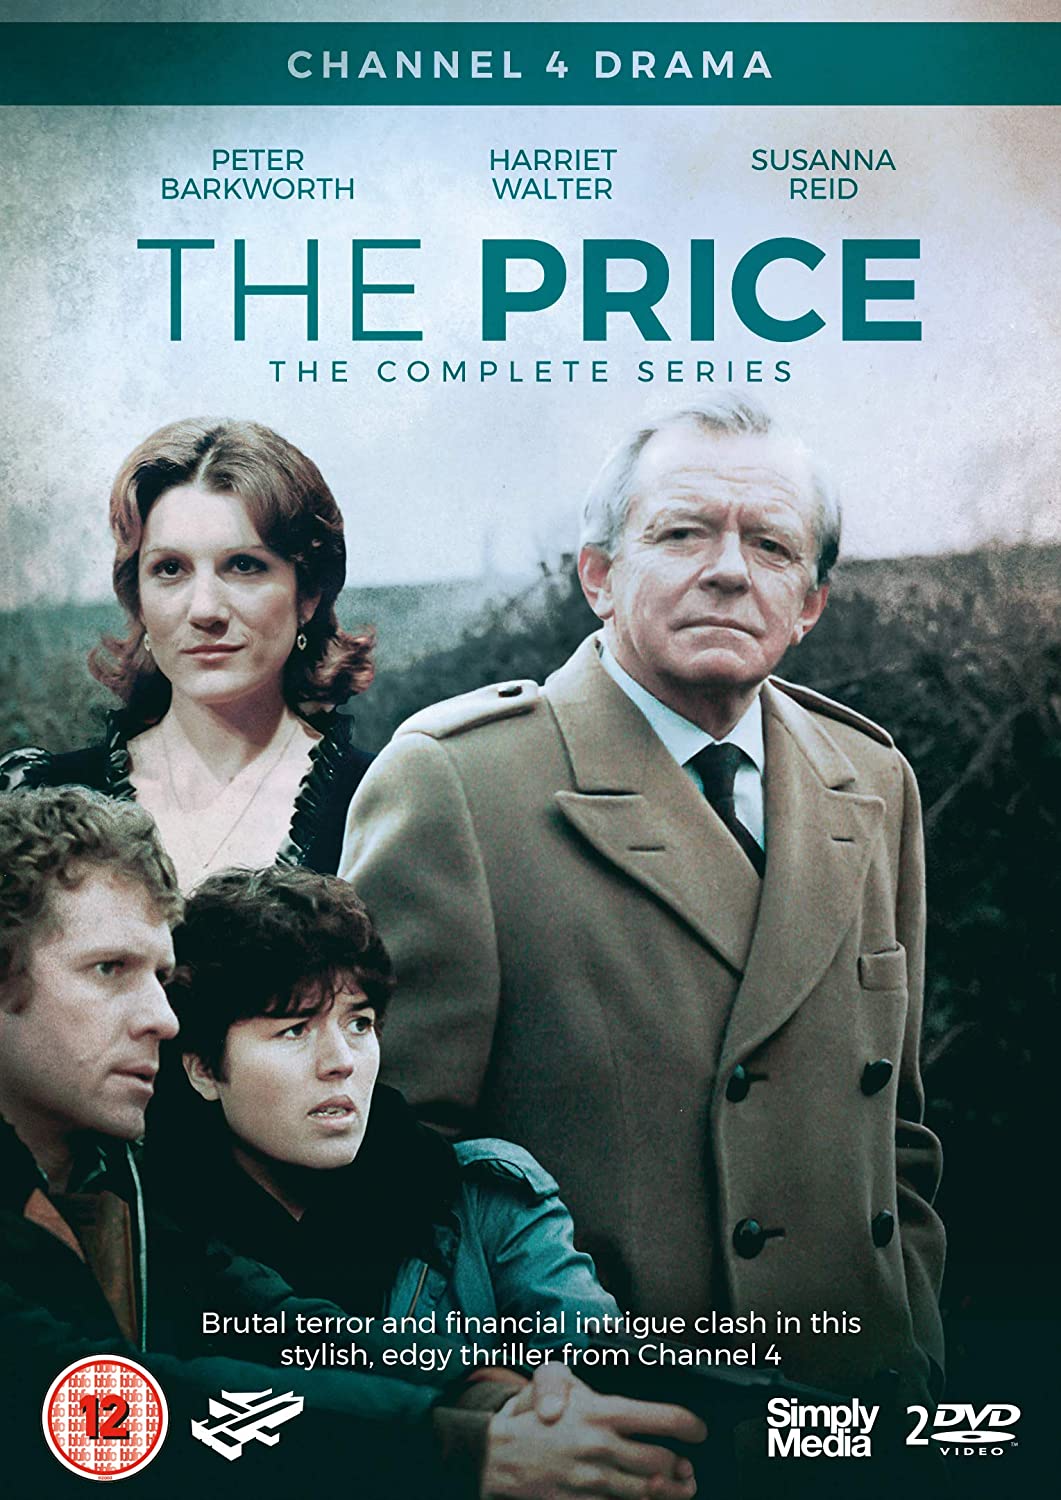 The Price - The Complete Series - Channel 4 Drama [DVD]